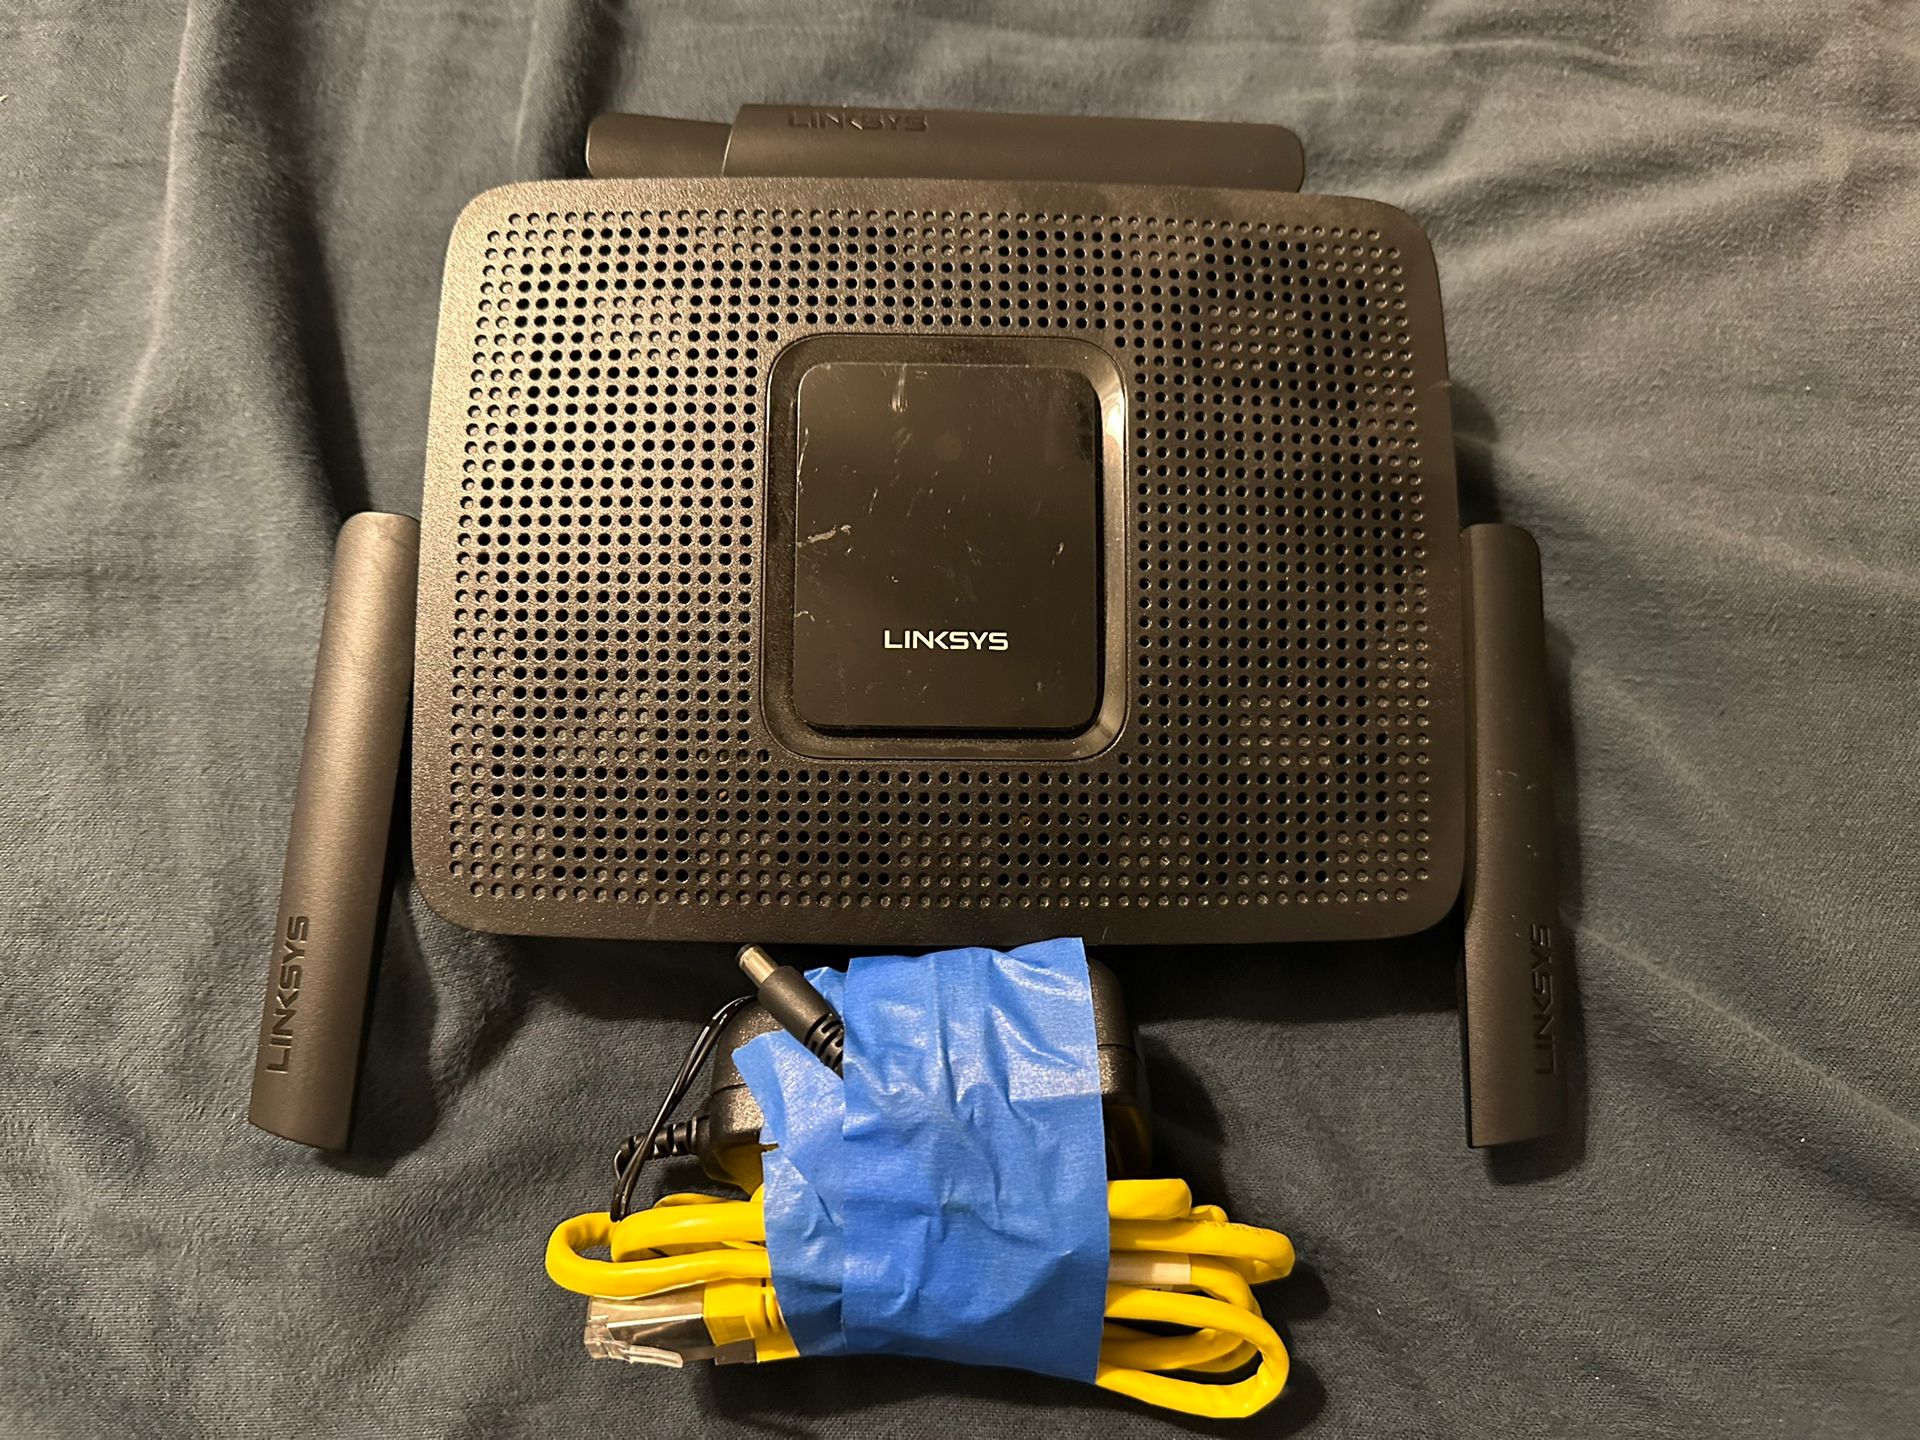  Linksys Wi-Fi Router